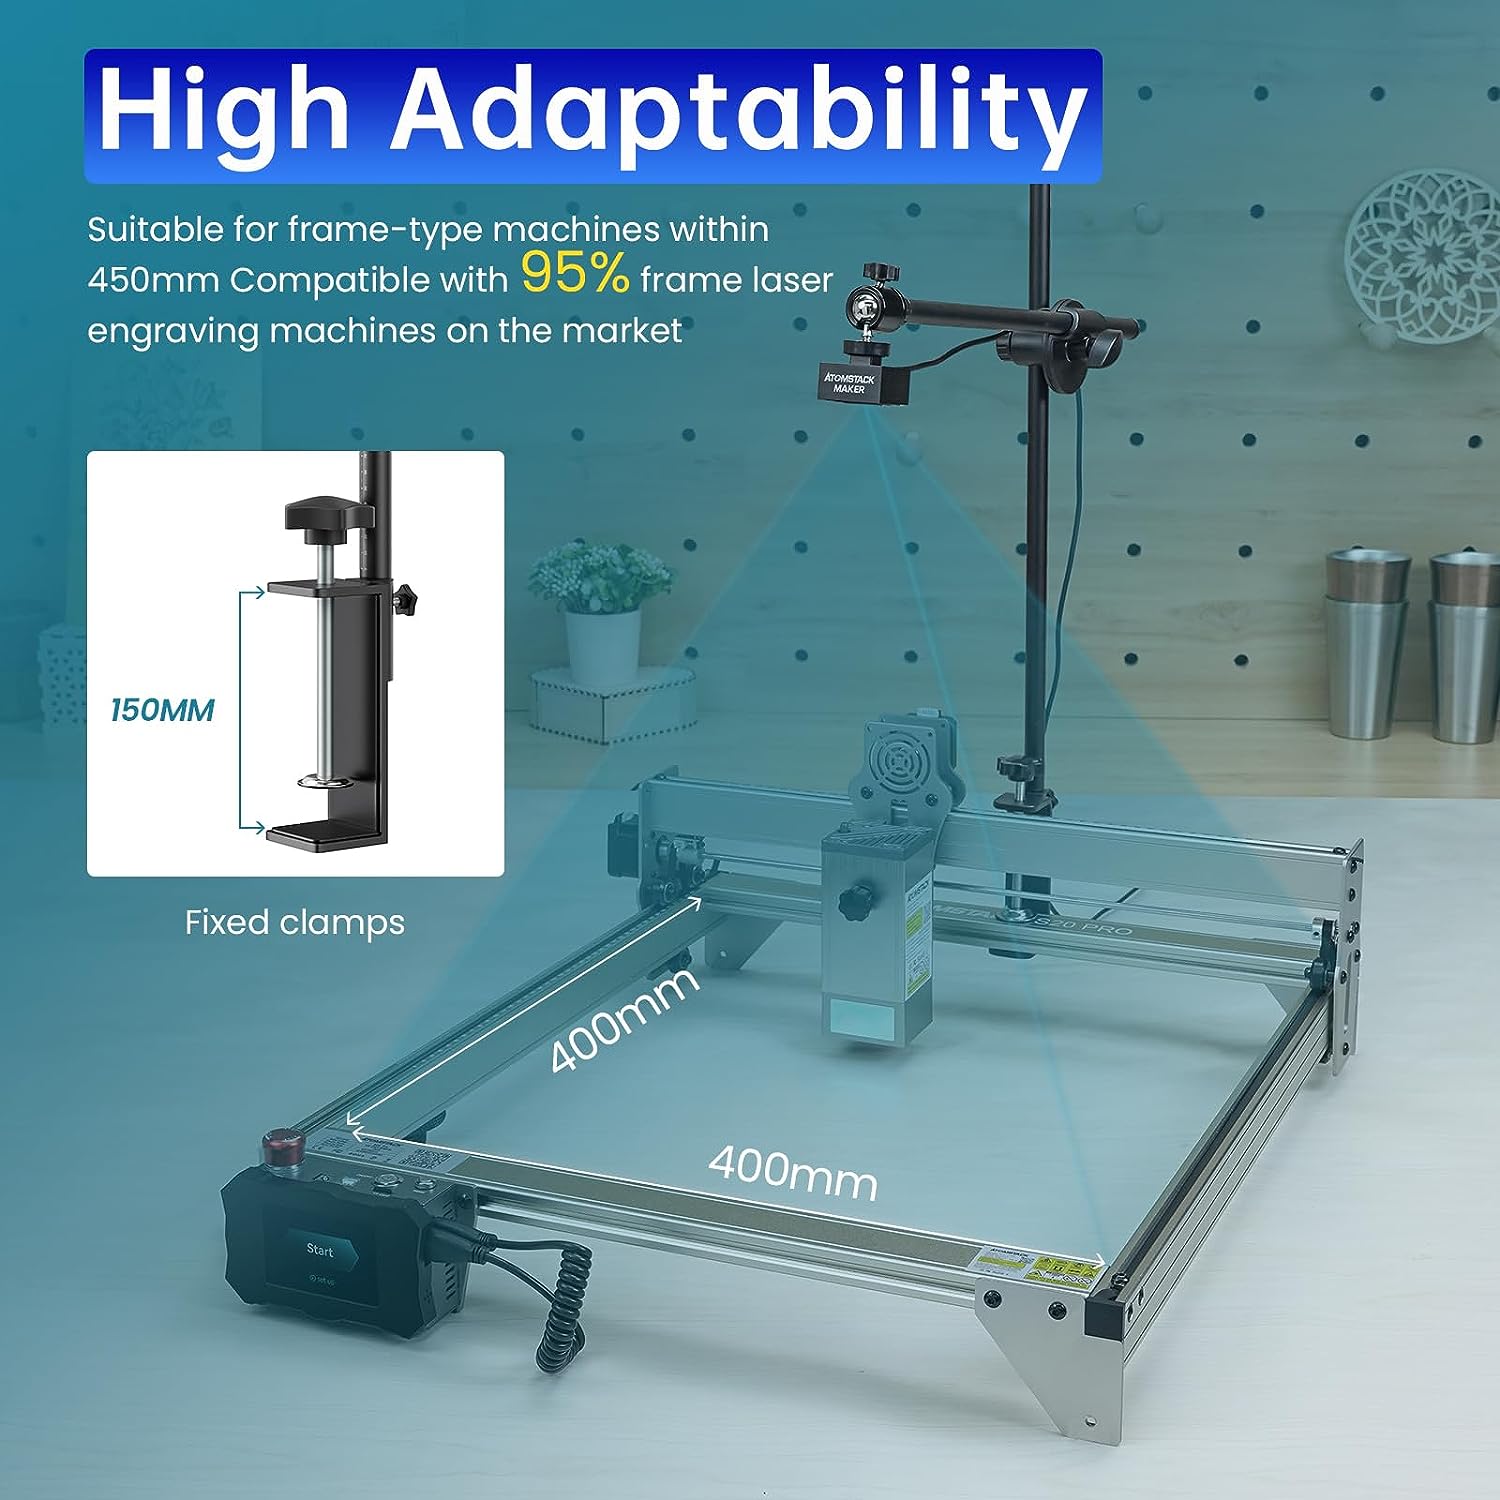 ATOMSTACK MAKER AC1 Camera for Laser Engraver, 400*400mm Photography Area Laser Camera for Engraver, Laser Engraver Camera Support Video Record, Work Preview, Multitask Operation, Precise Positioning